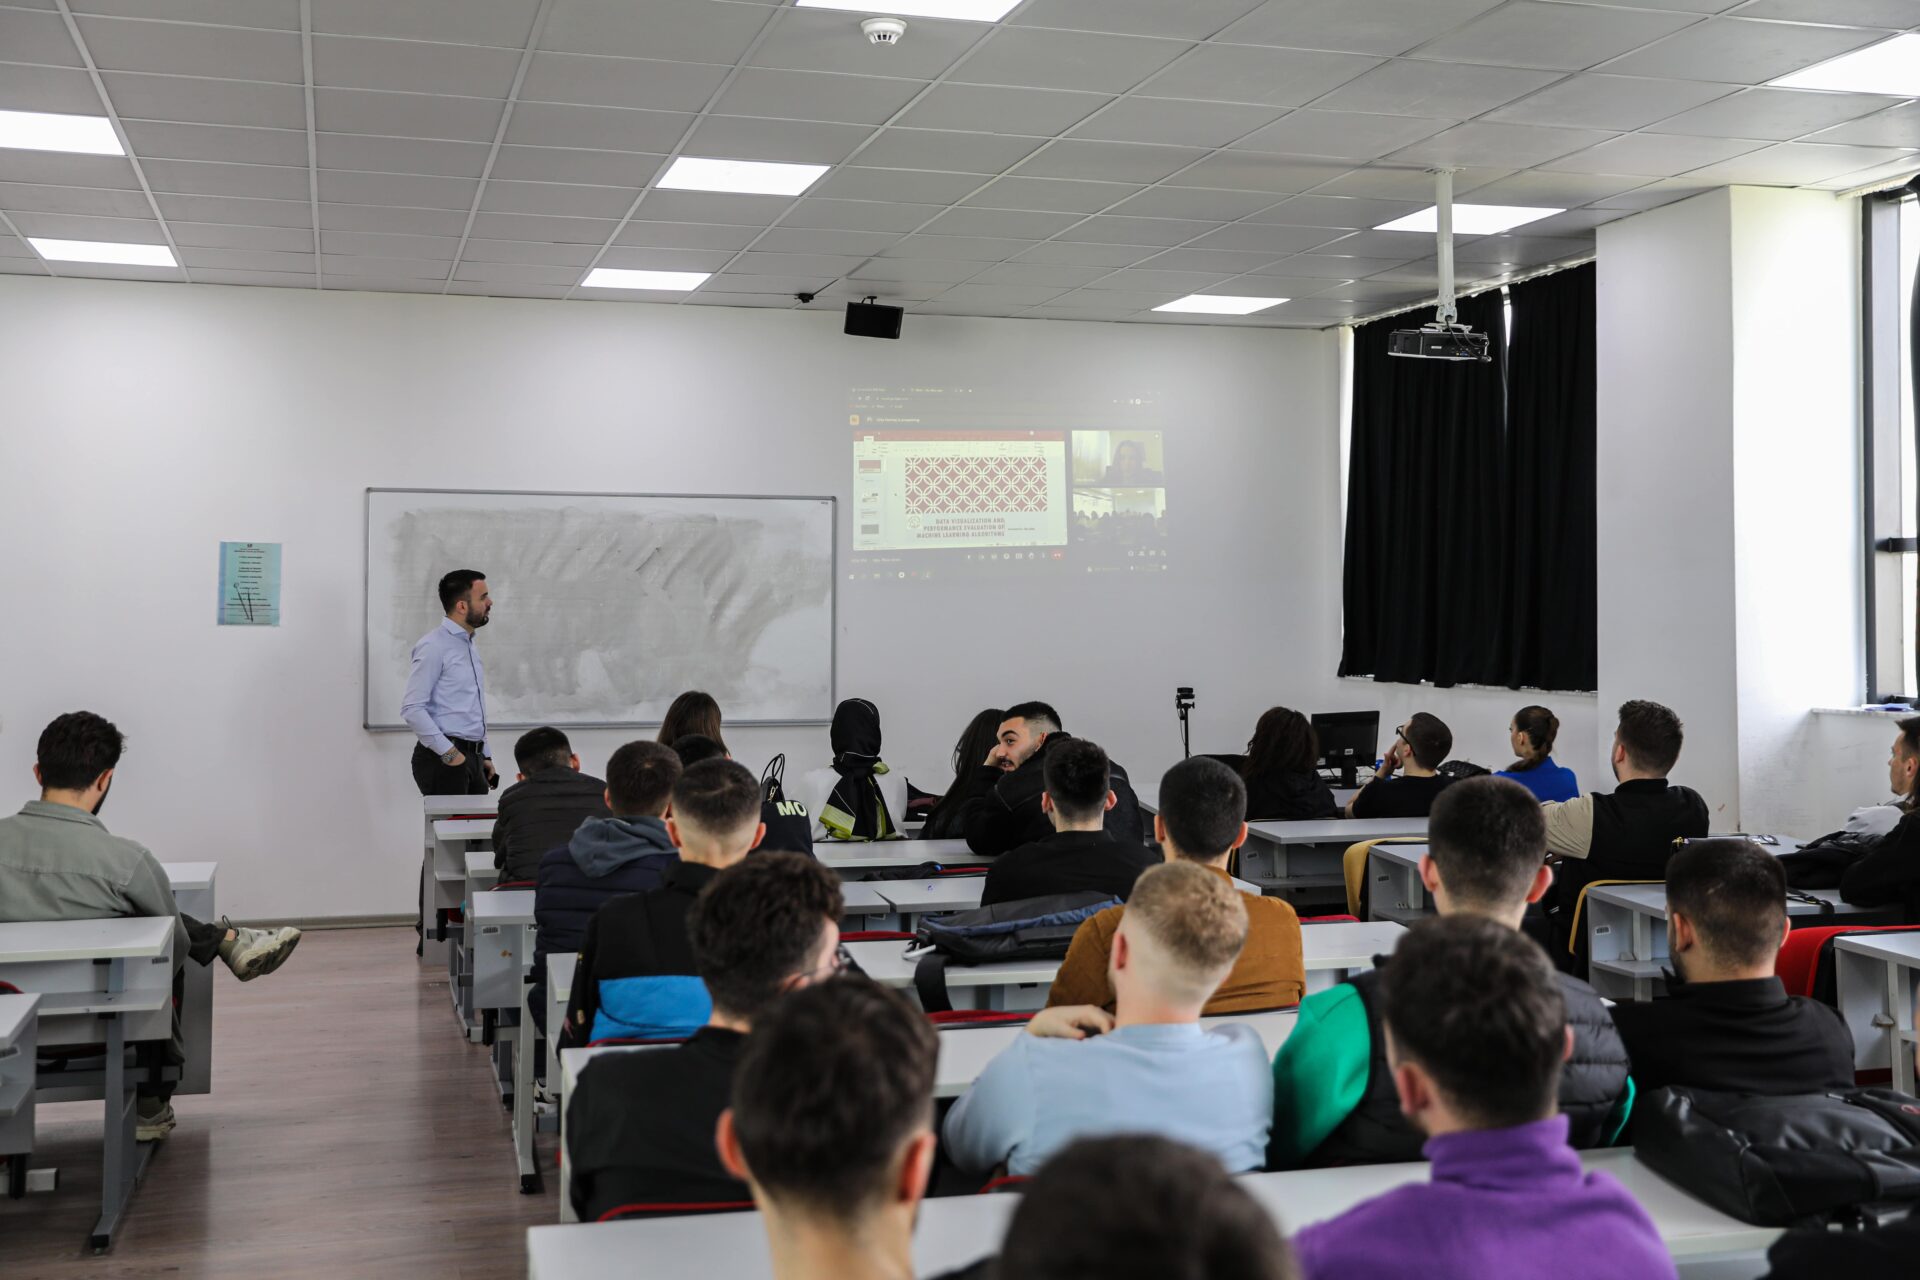 The professor from "Logos" University College holds a lecture for the students of AAB College